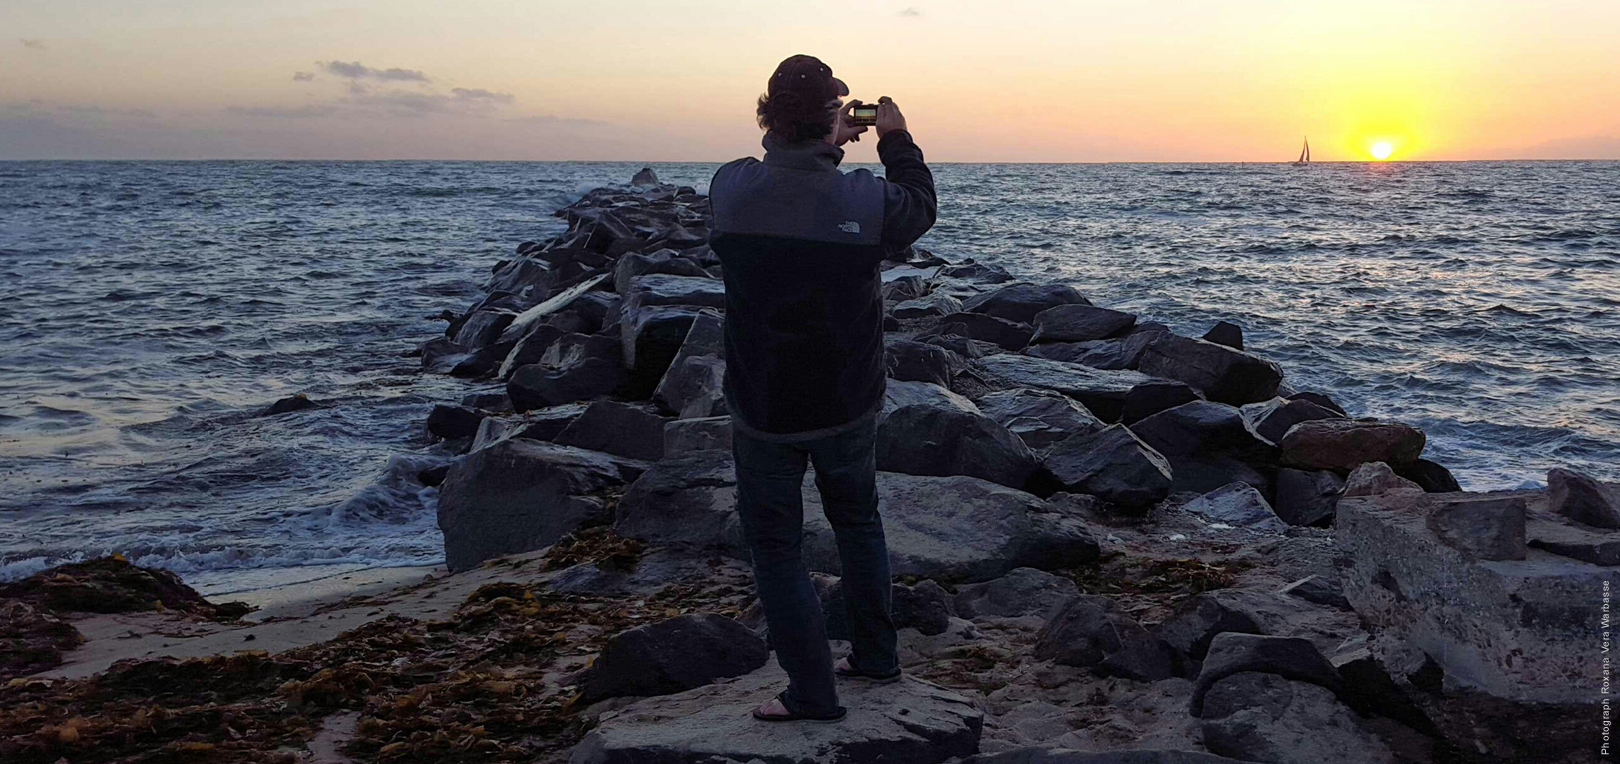 Philip Warbasse taking pictures of the ocean